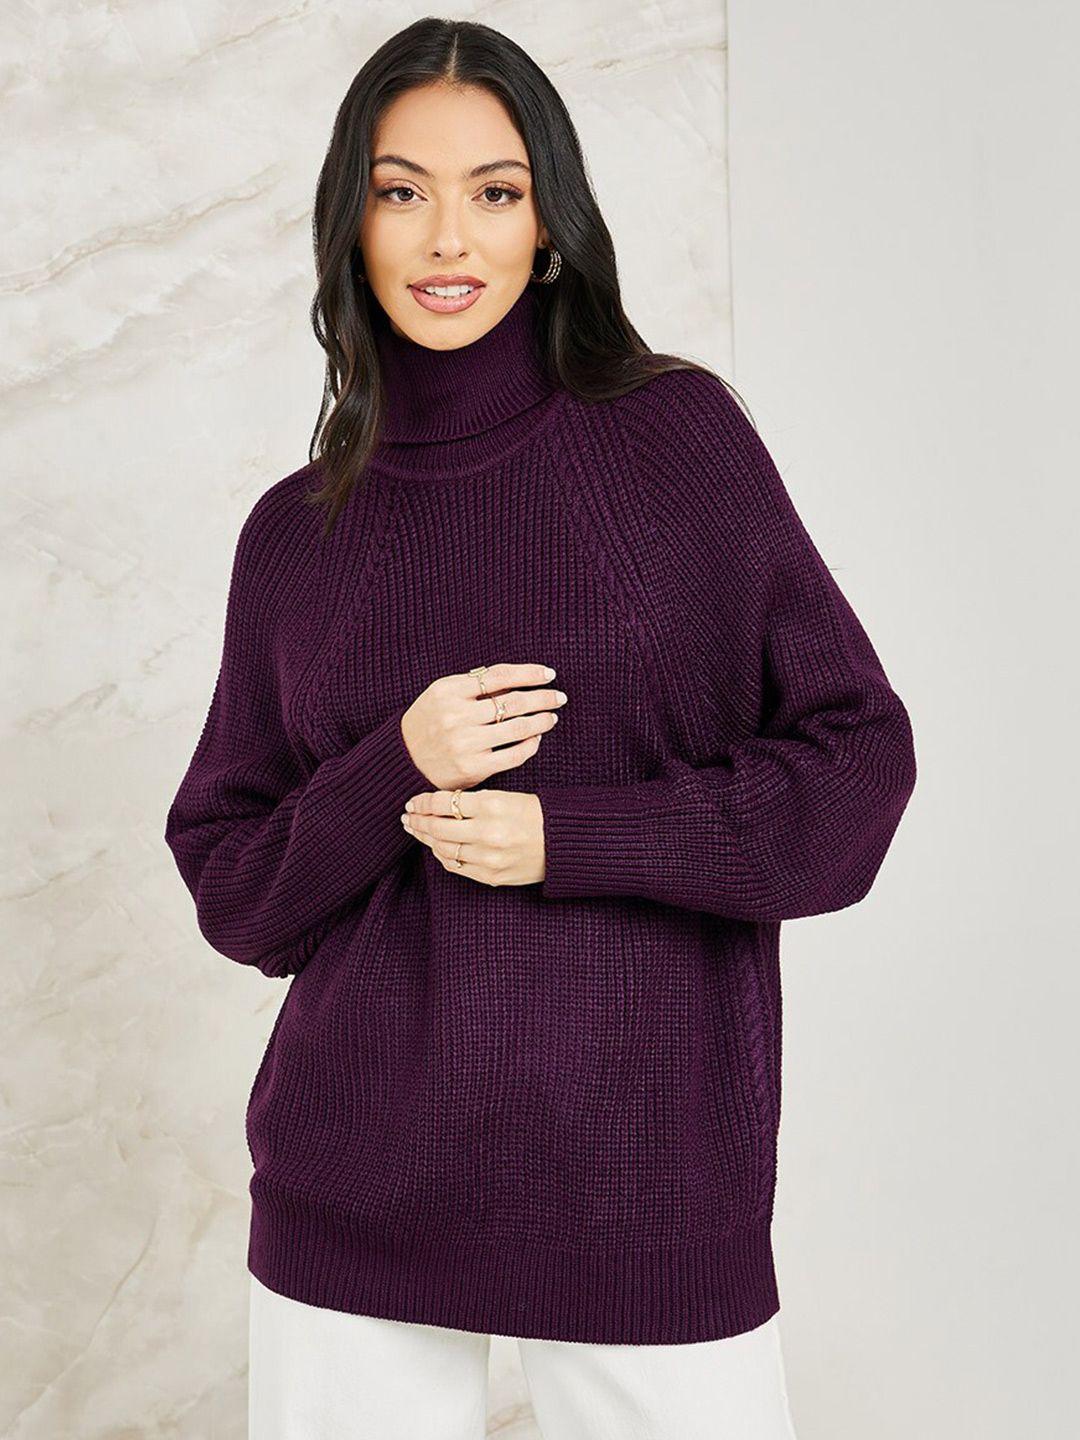 styli-ribbed-turtle-neck-oversized-pullover-acrylic-sweater